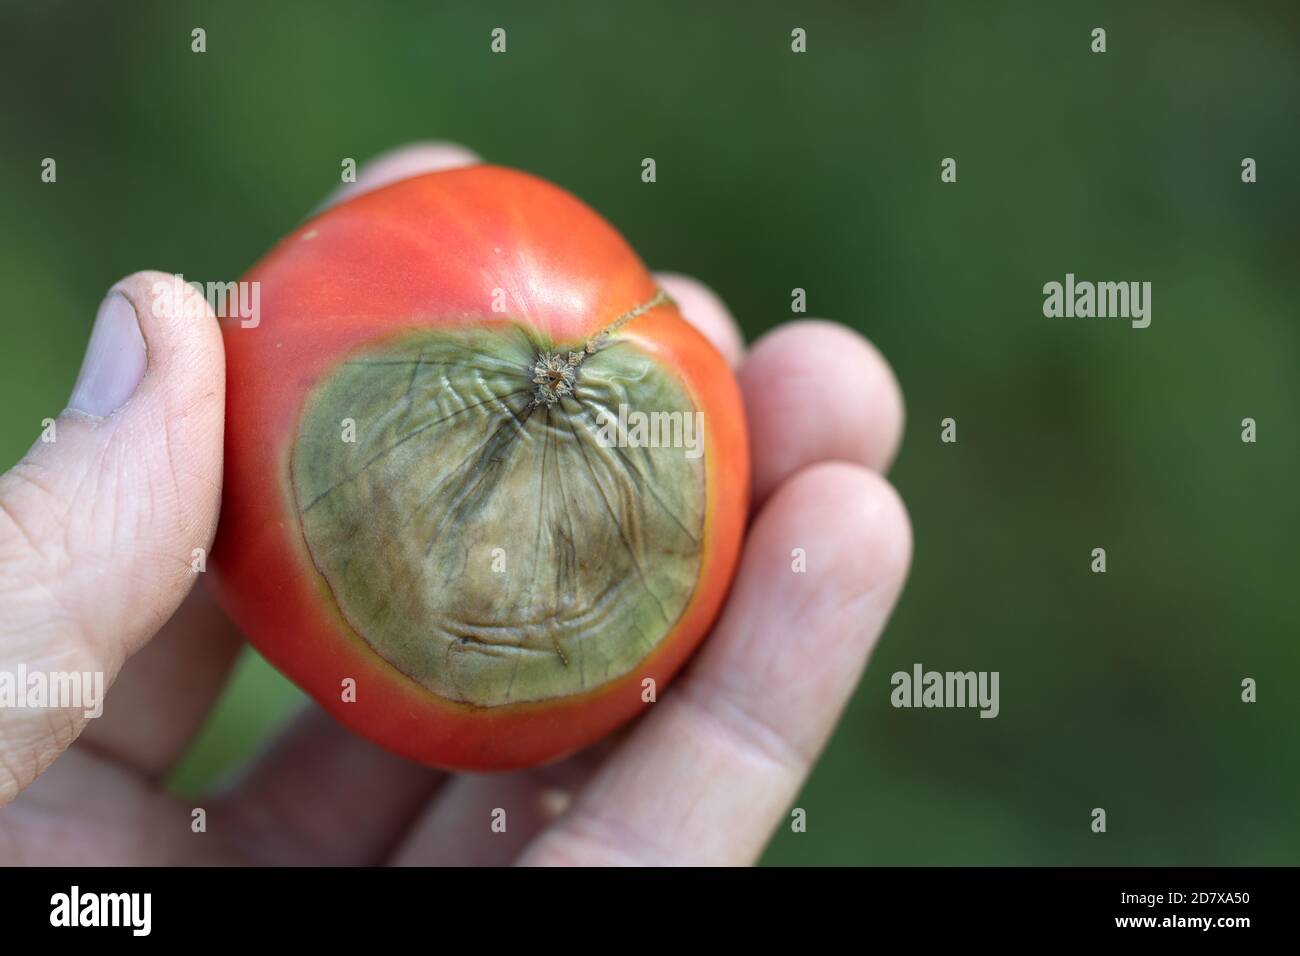 ripe red tomato with spoiled top of light green rot in hand Stock Photo